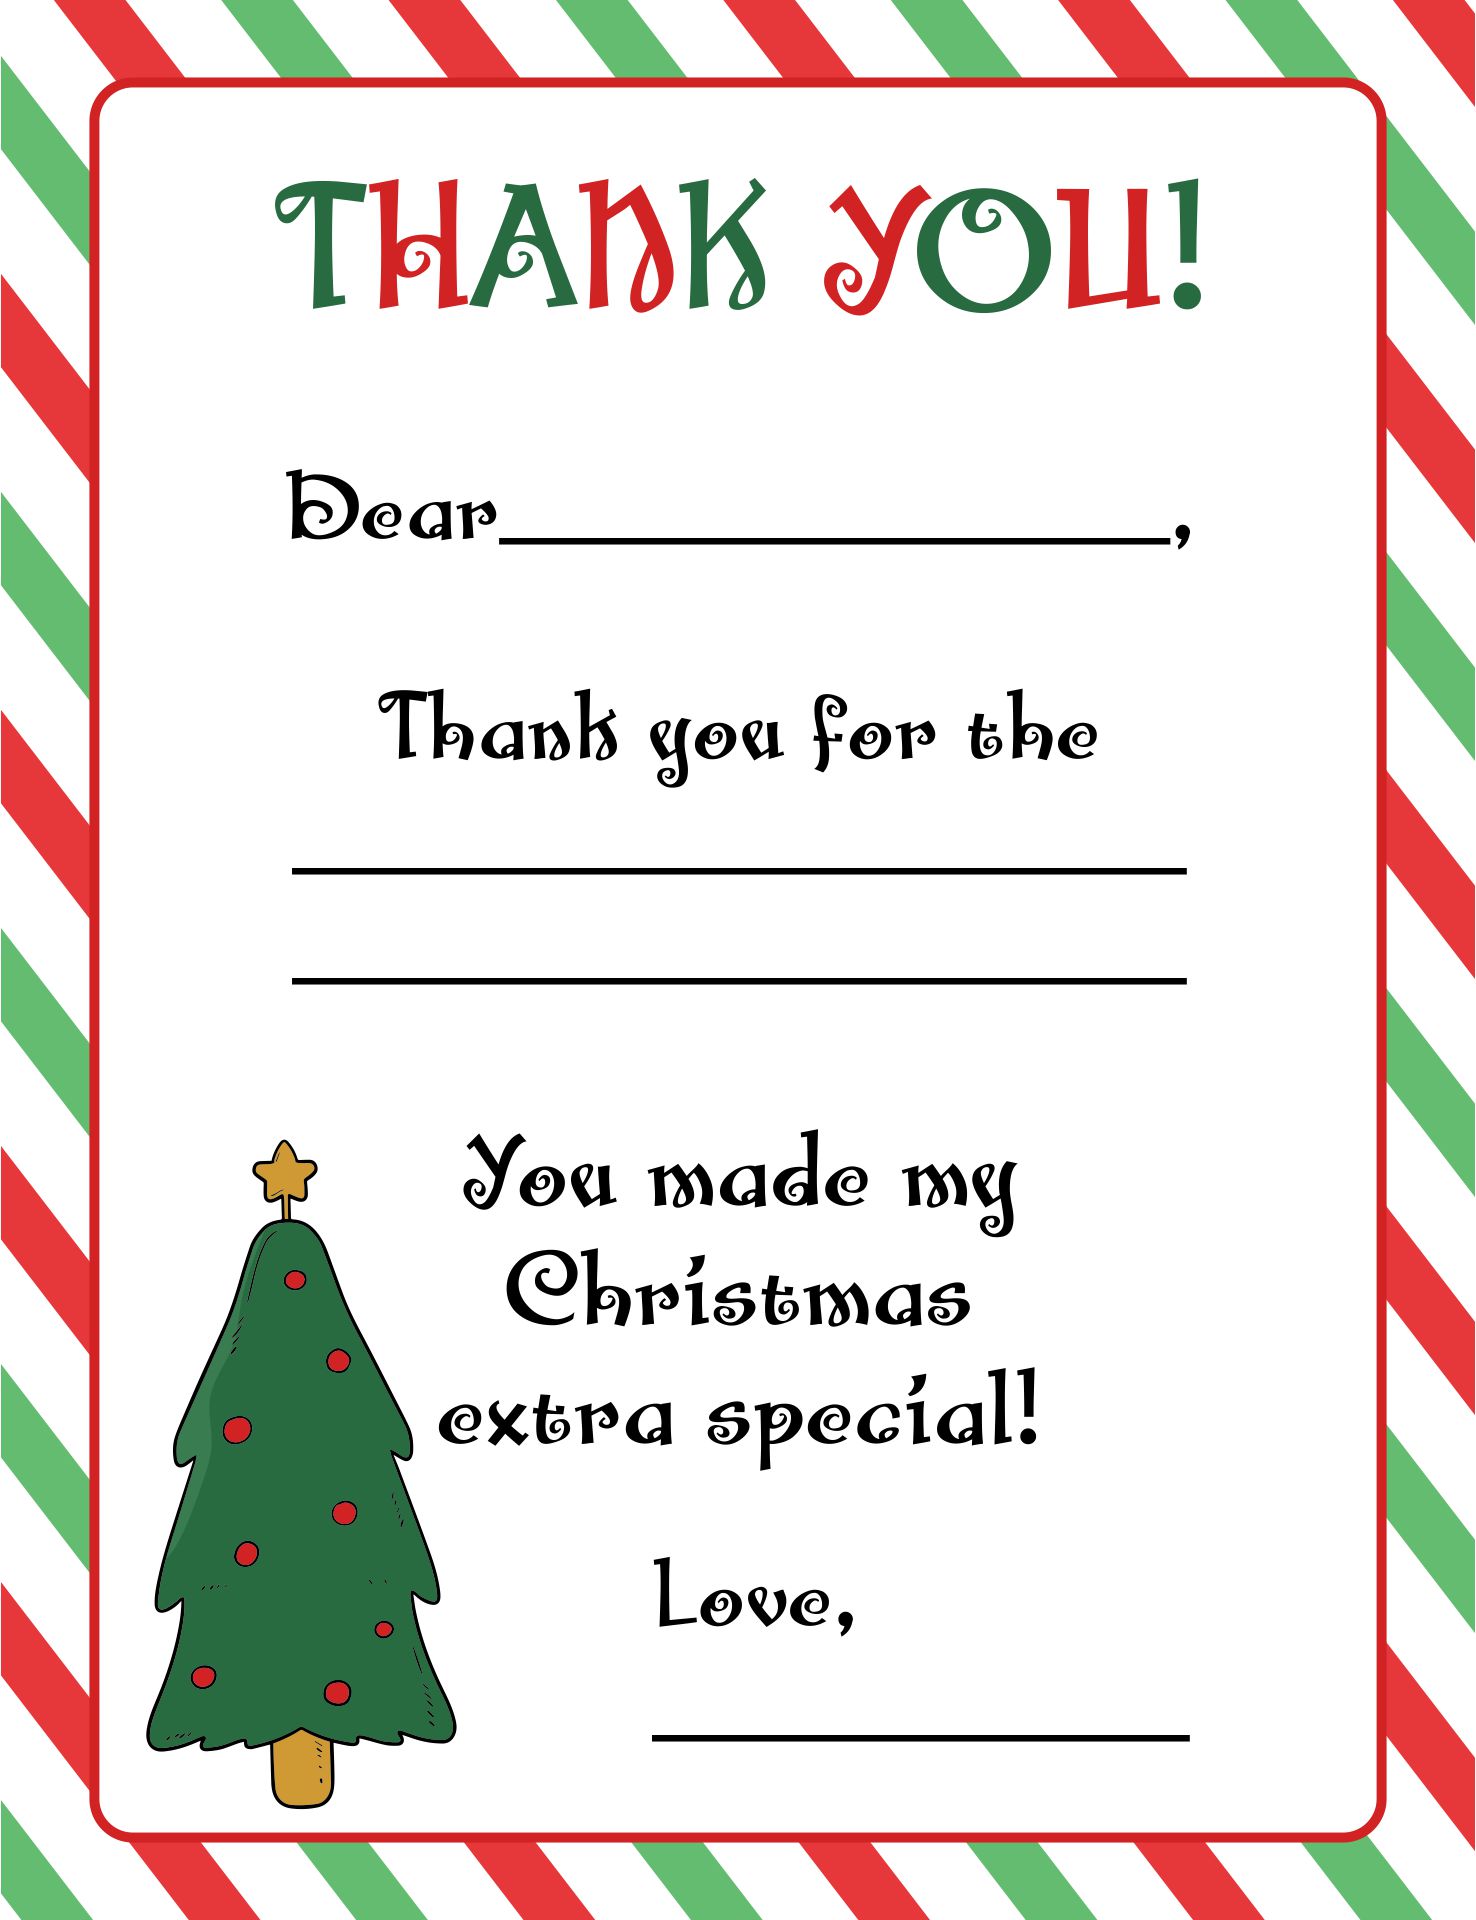 free-fill-in-the-blank-christmas-thank-you-cards-printable-24-7-moms